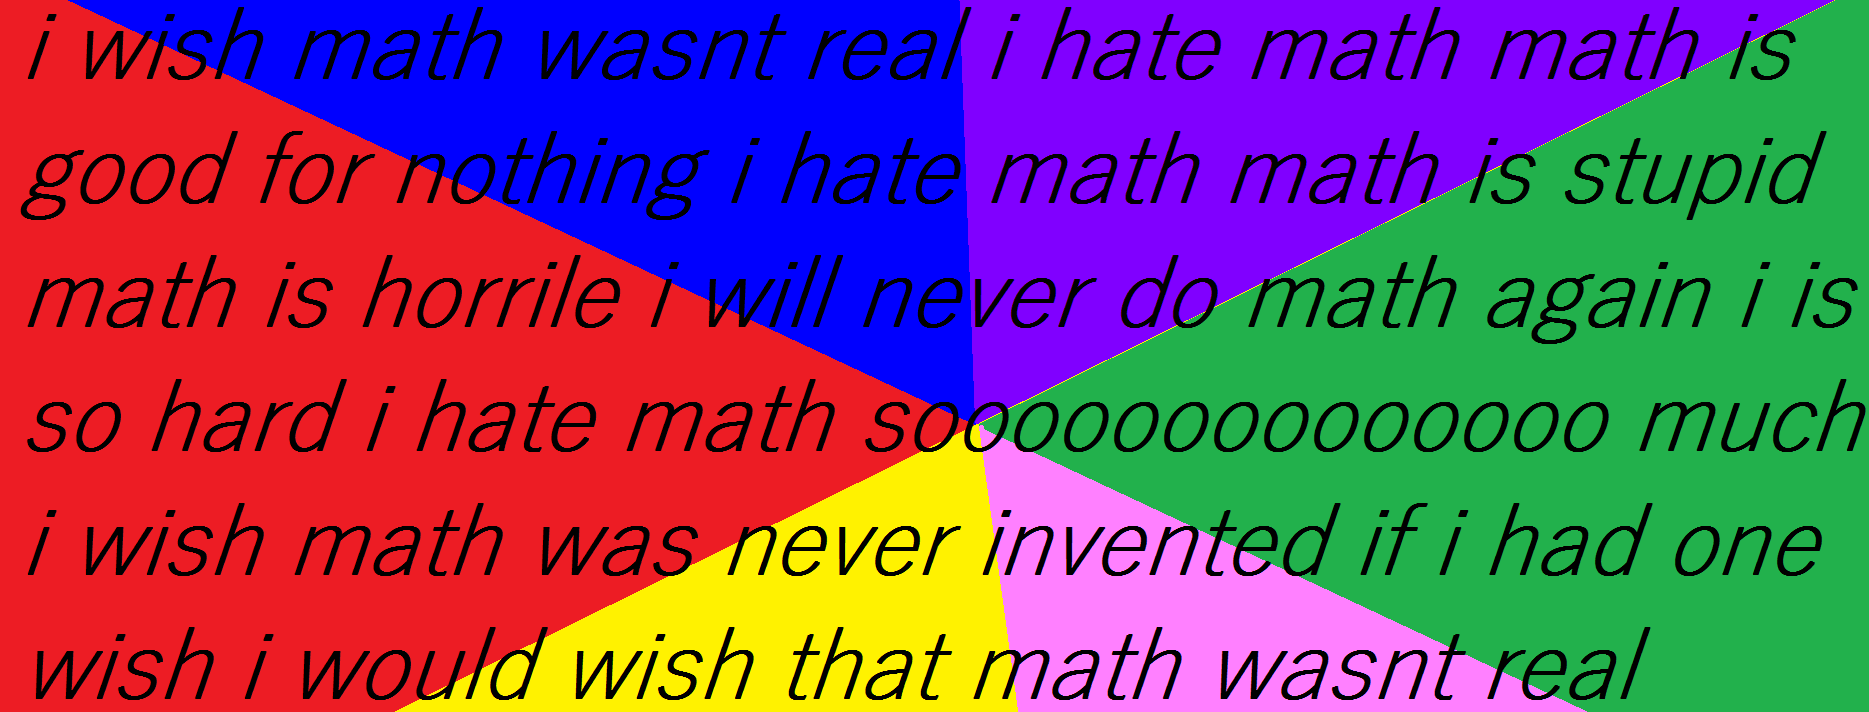 RitaCM2015 image I hate math wallpaper HD wallpaper and background